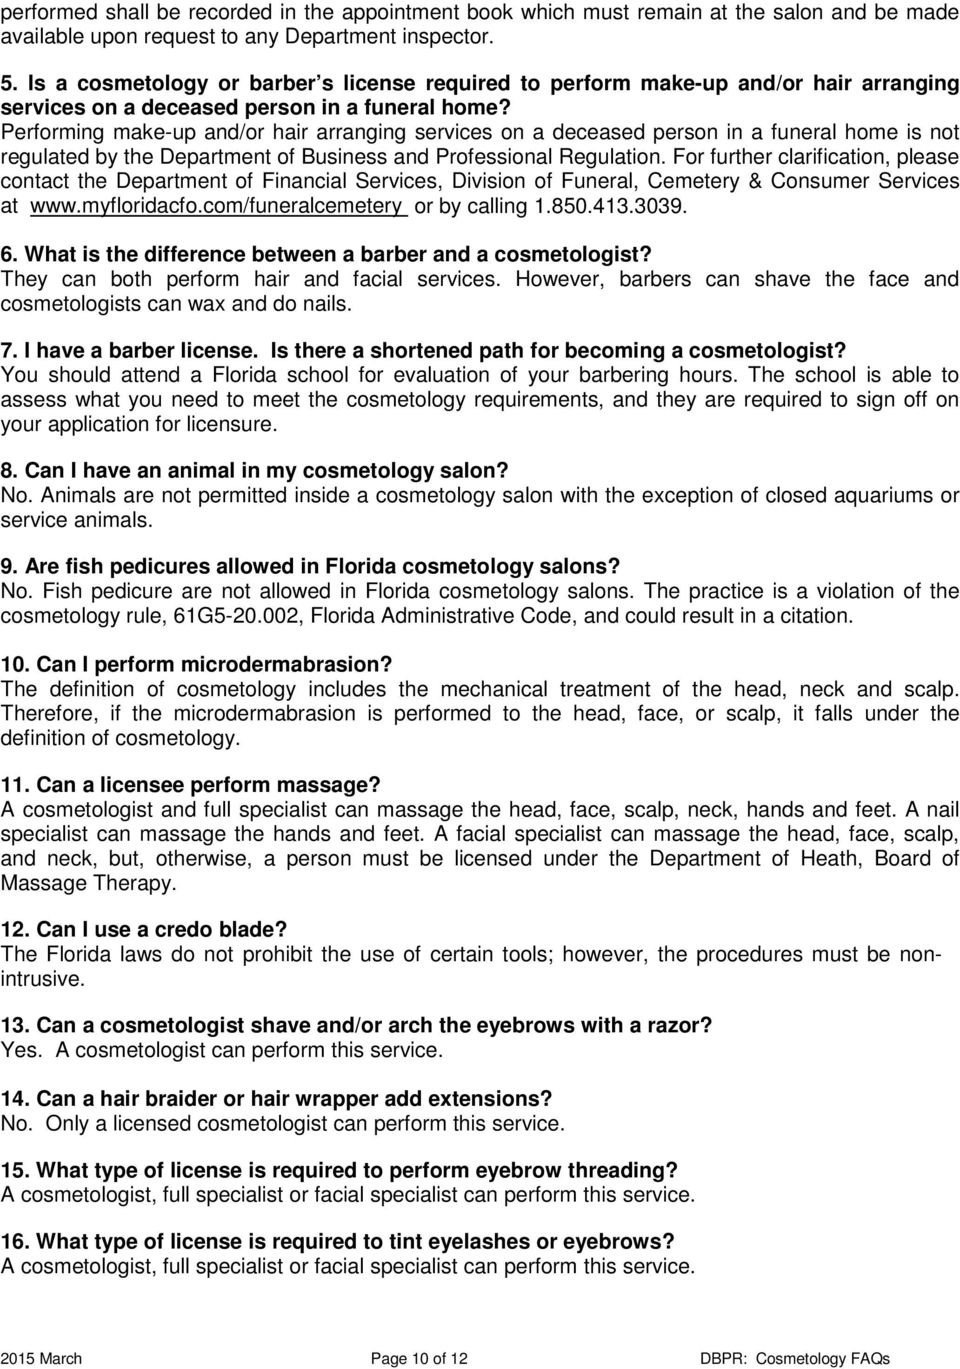 board of cosmetology frequently asked questions and answers - pdf